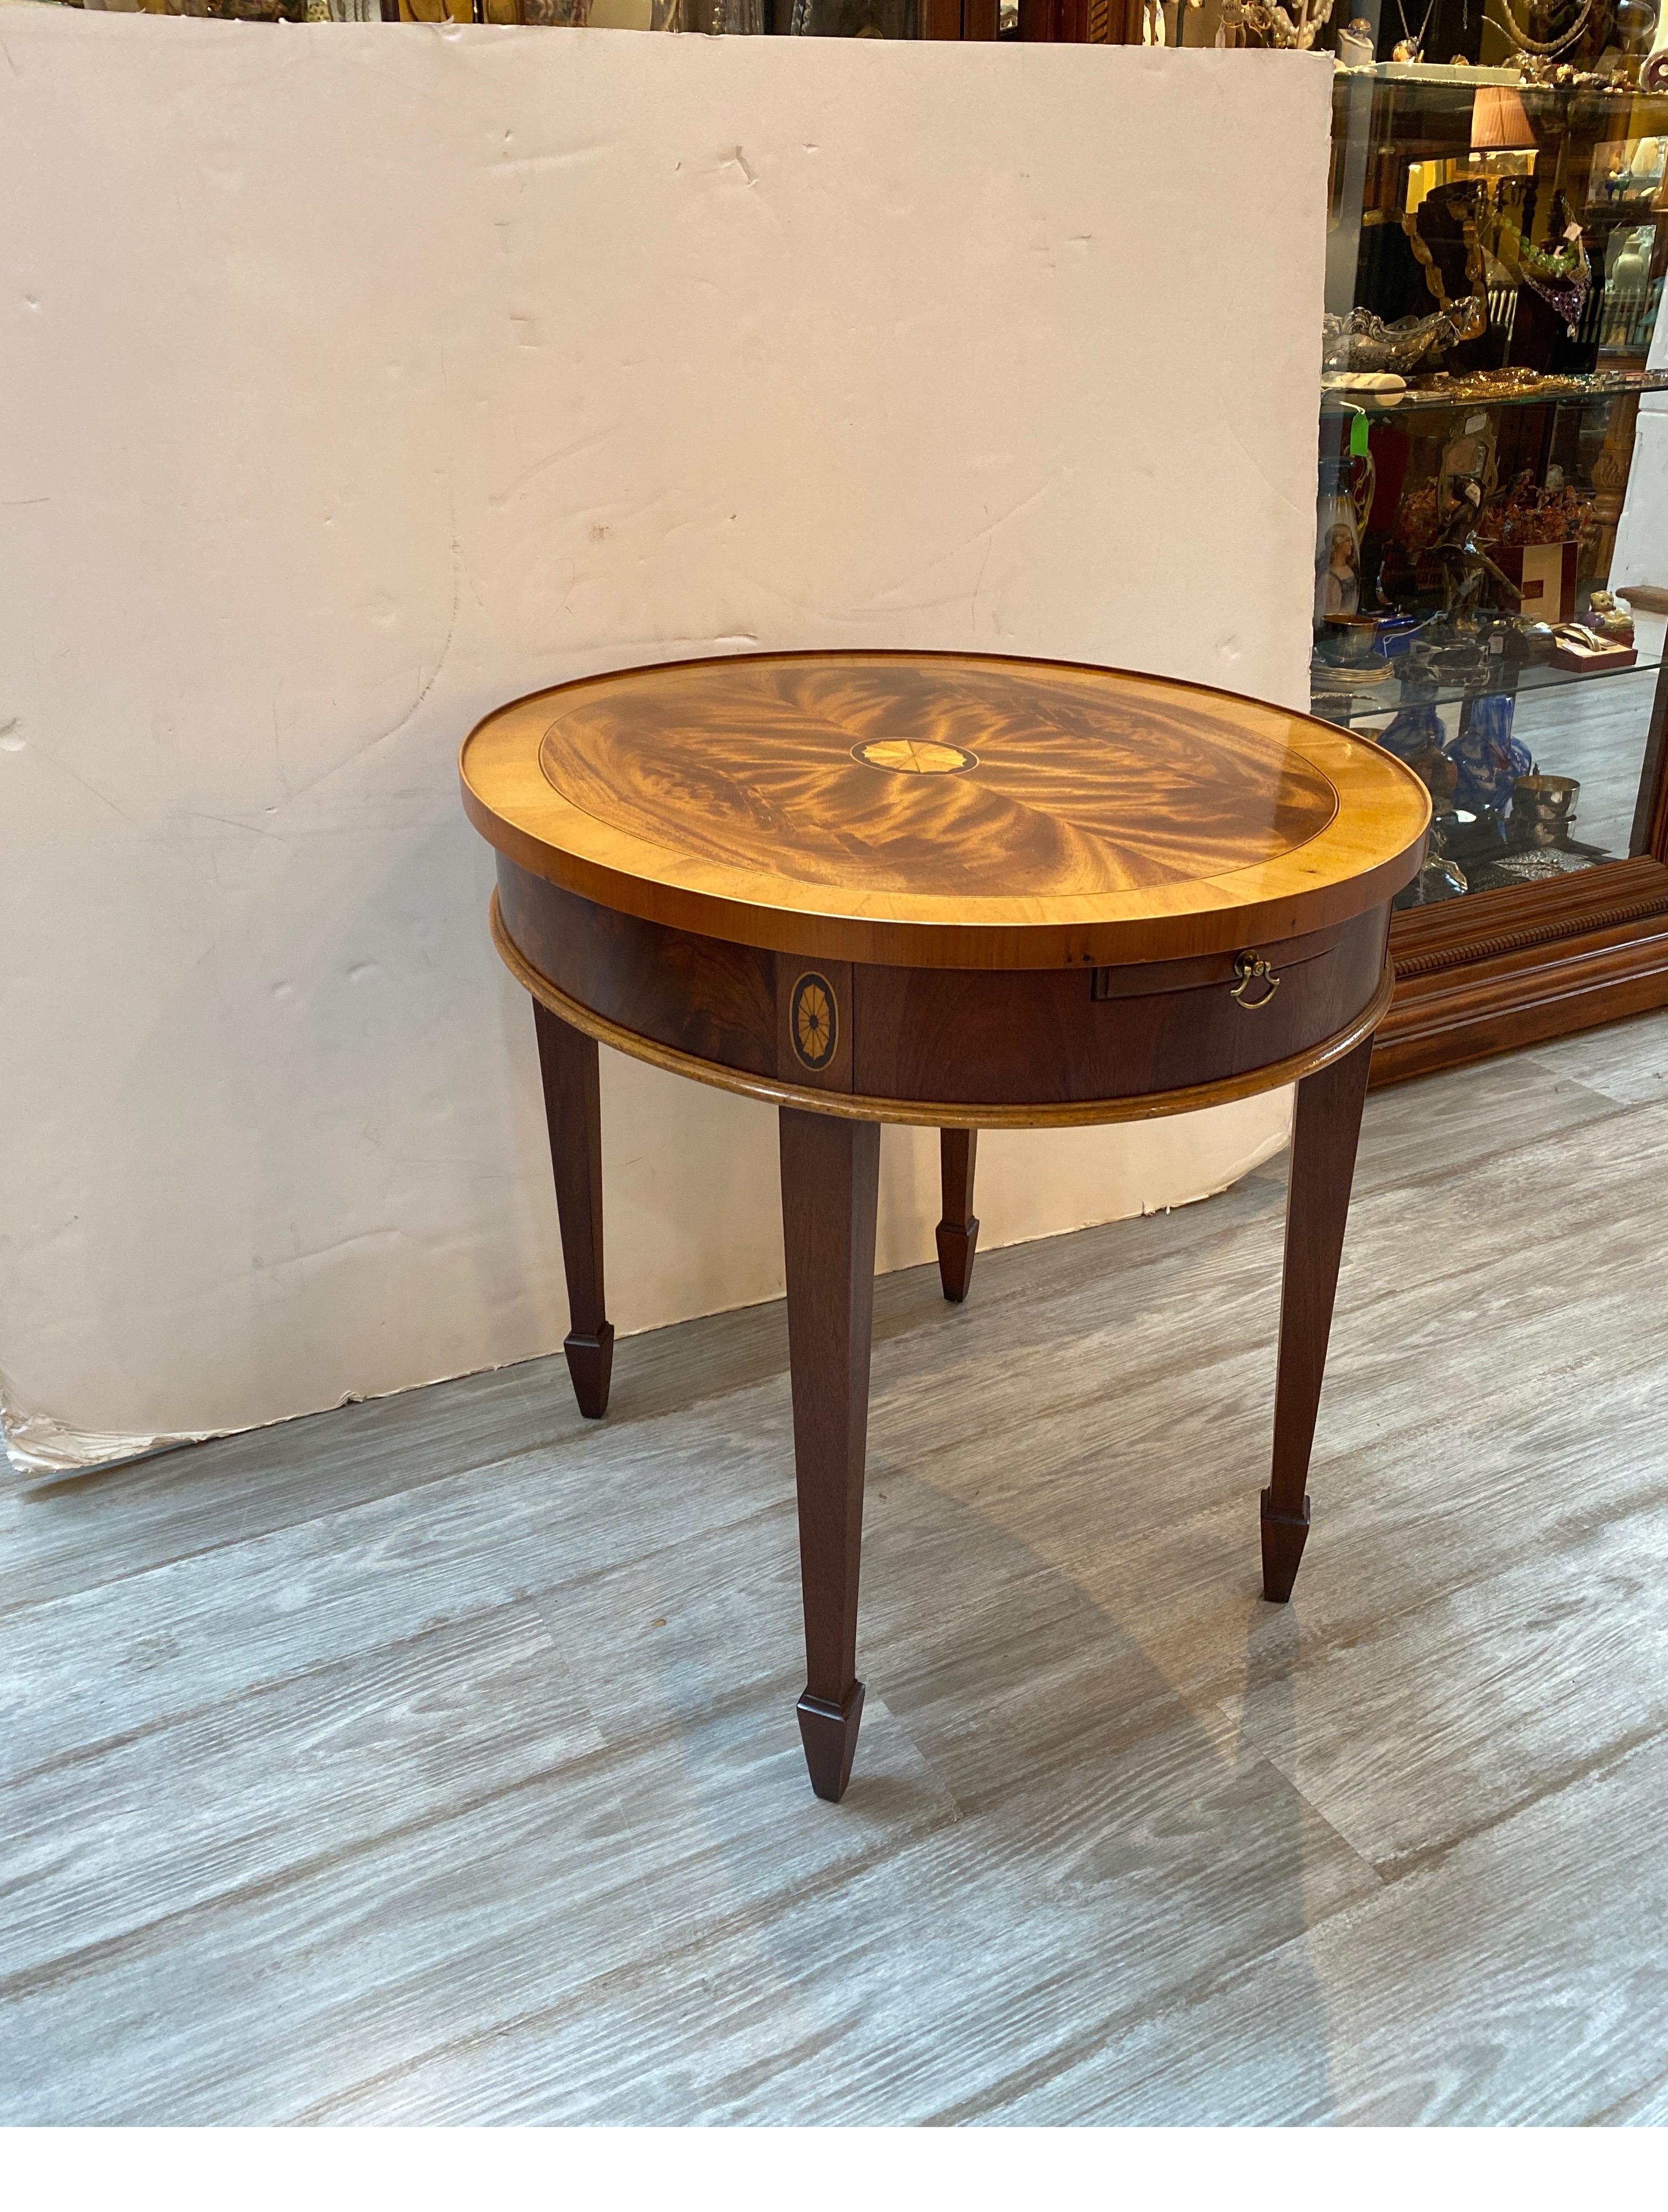 Elegant oval flame mahogany table with candle pull out shelf by Hekman. The highly figurative top with center satinwood medallion The tapering legs with inlay at the top. The front with a mahogany pull out tray.